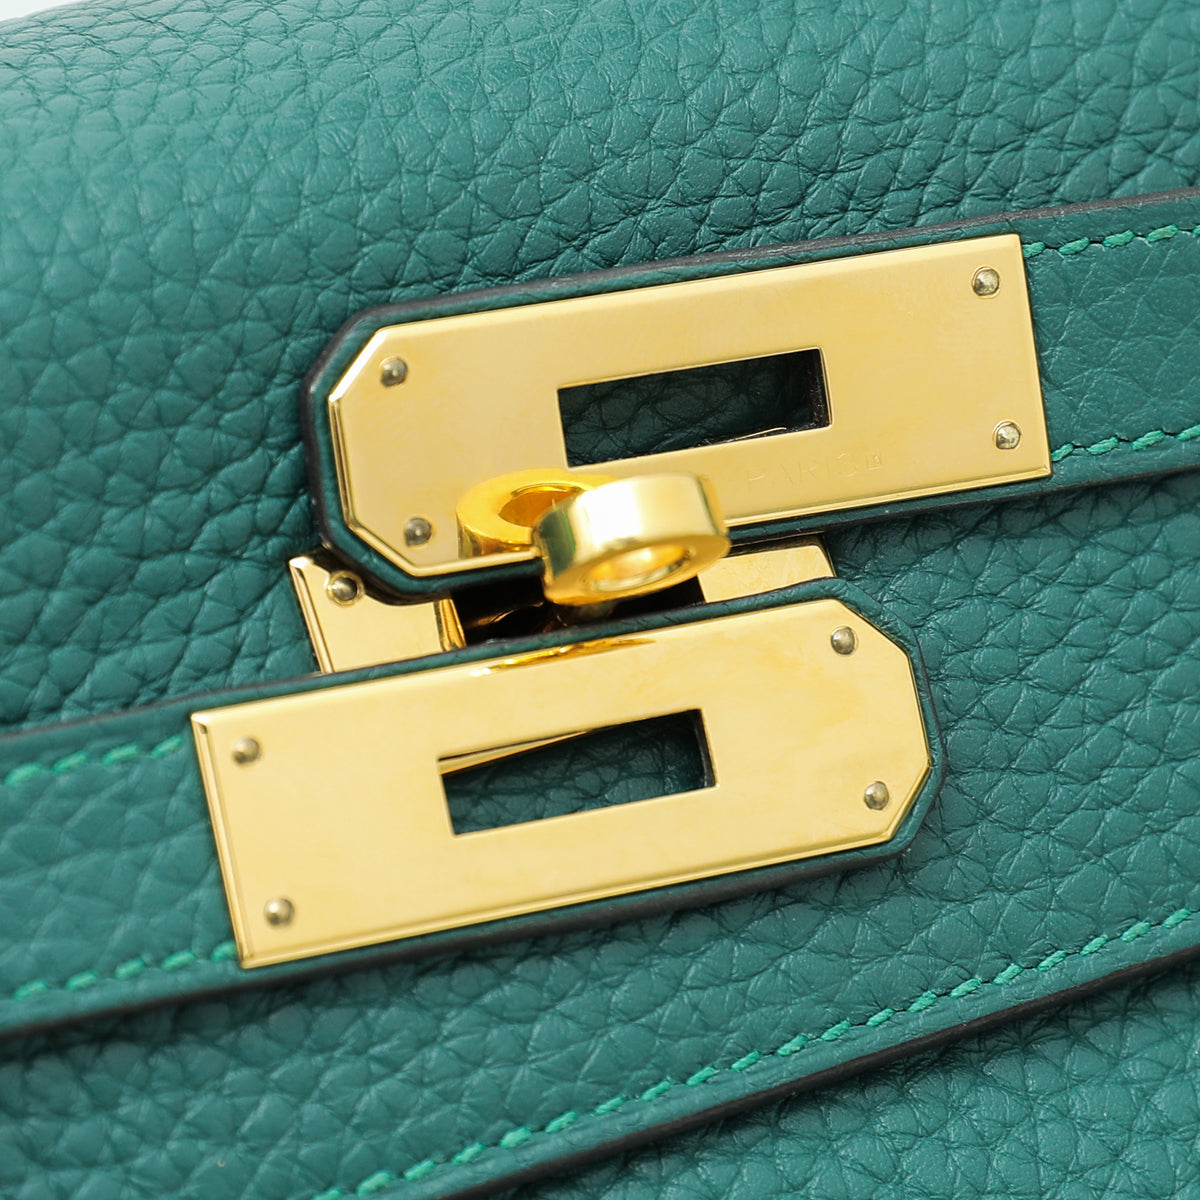 Hermes Kelly Green Malachite Clemence with Gold